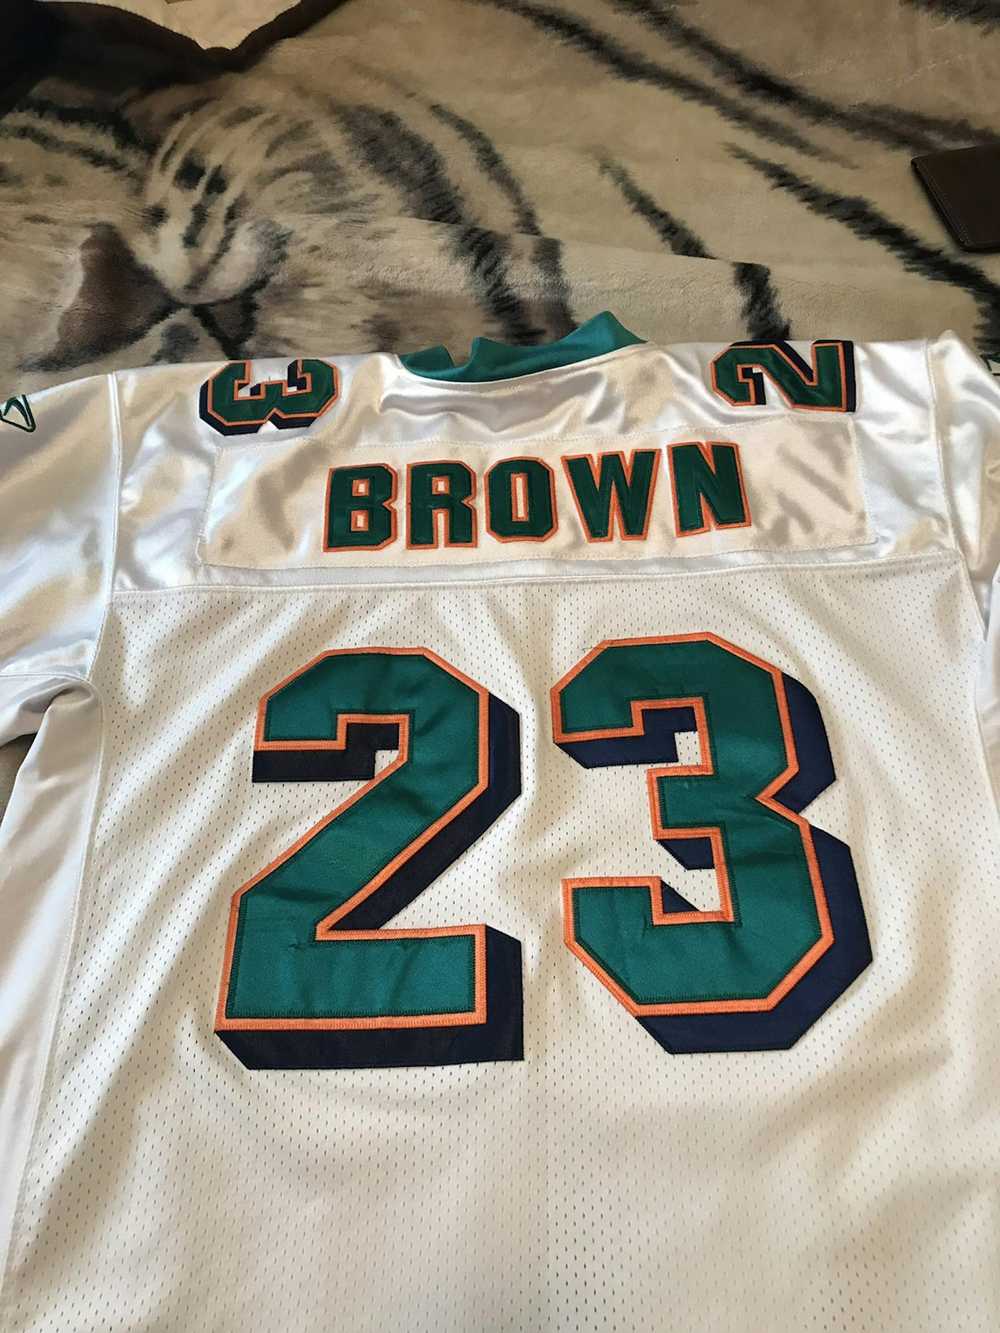 NFL × Reebok Miami Dolphins Ronnie Brown Jersey - image 2